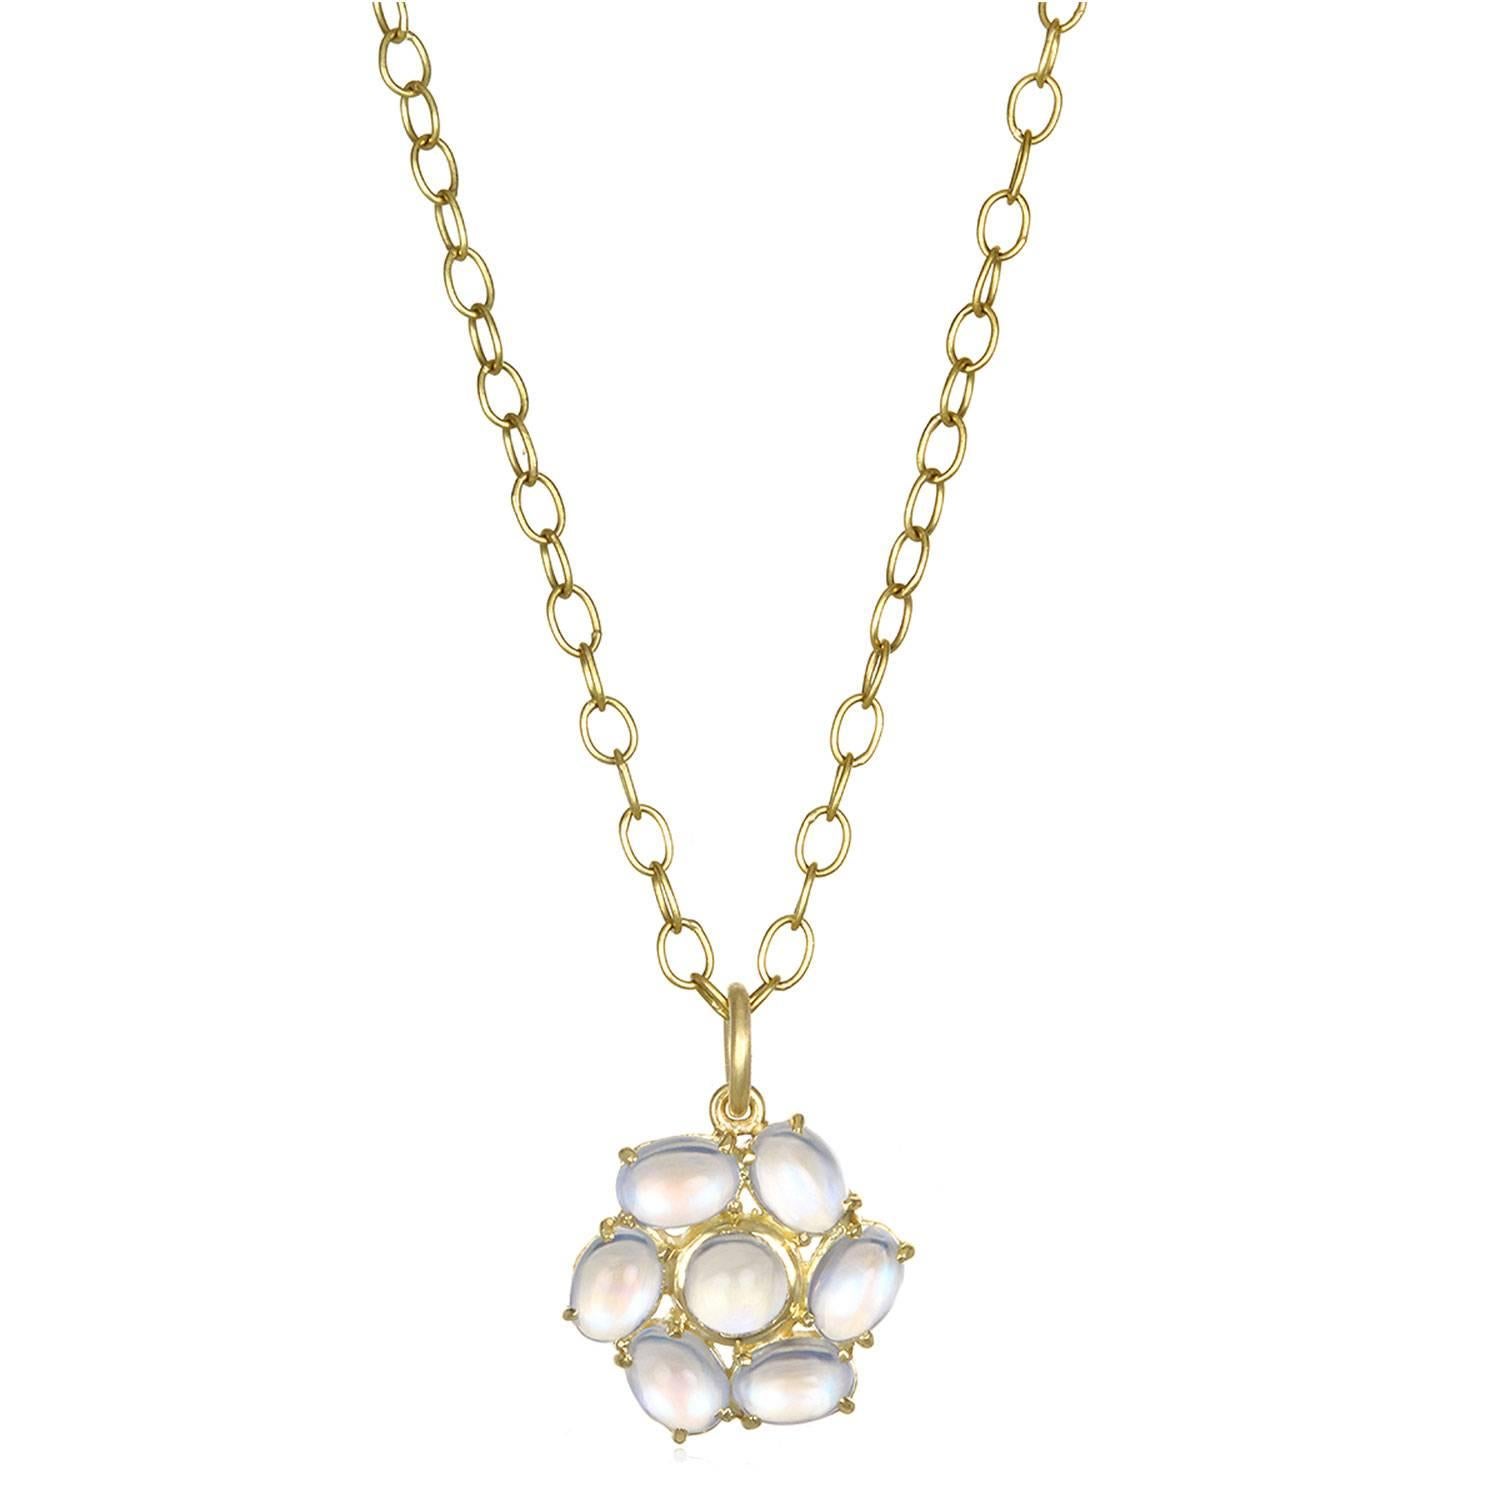 Ceylon Moonstone Daisy Pendant in 18K Gold. Known for its adularescence, the inimitable blue flash from Ceylon moonstones adds to the overall mystique surrounding moonstones. Whether worn long, short or layered, this pendant is wearable and